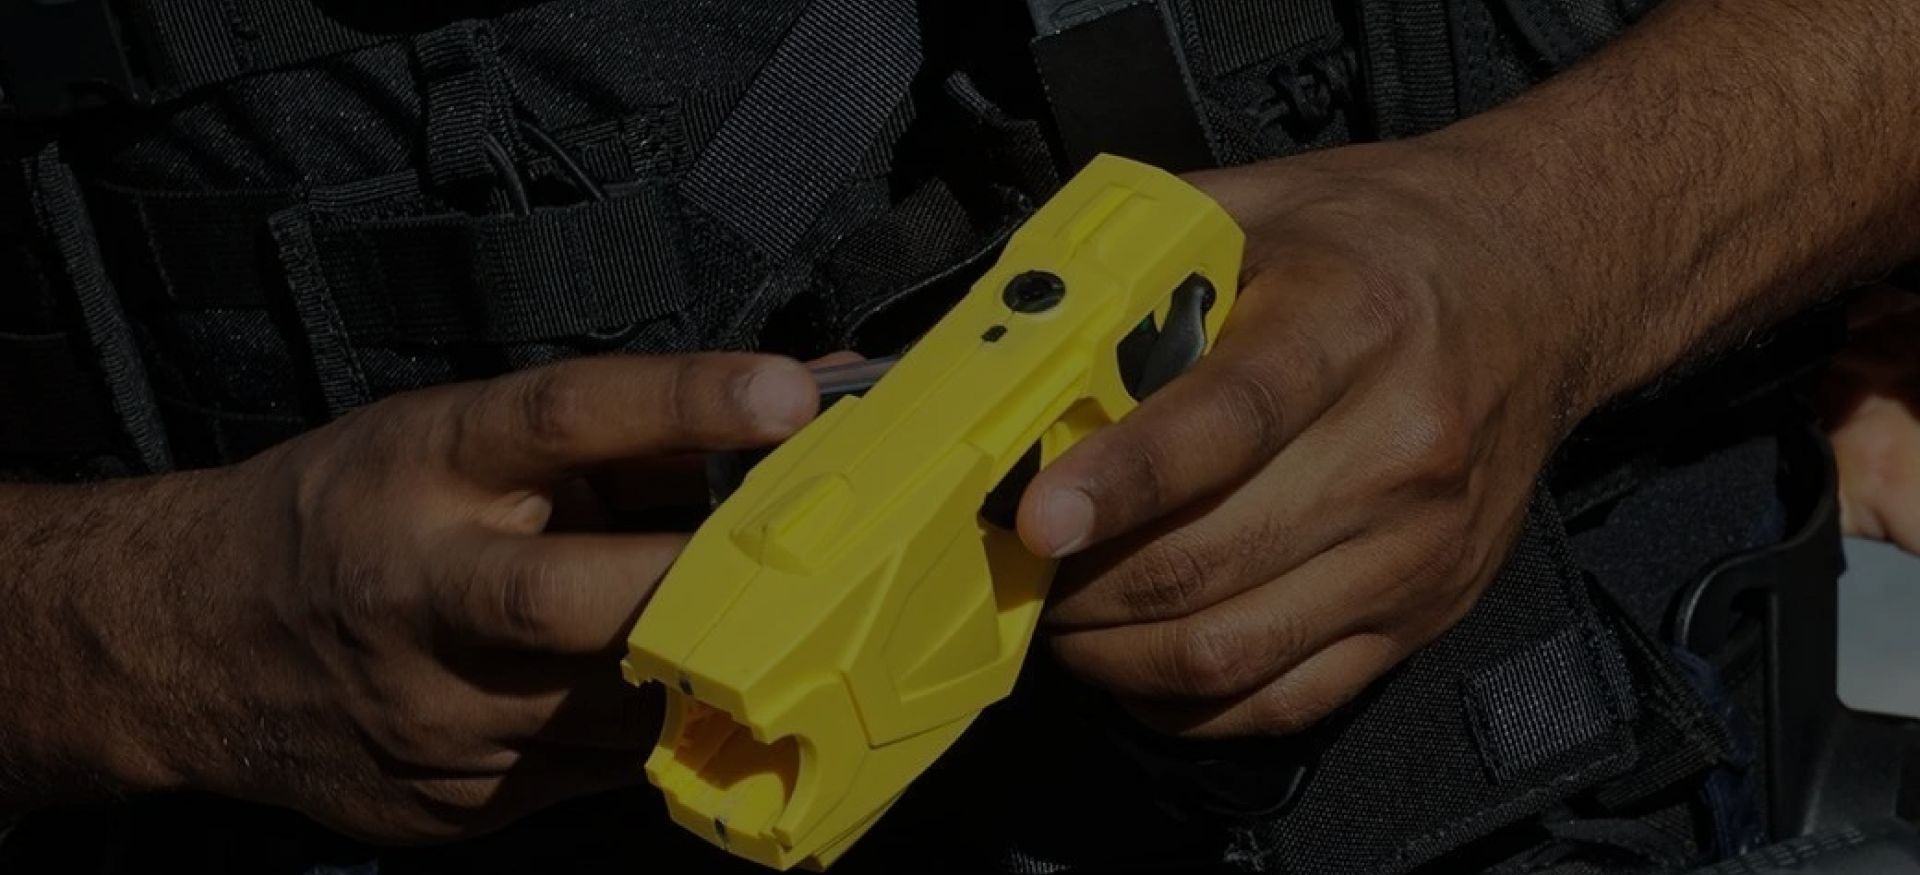 An image of a Yalow color Stun Guns for Self-Defense item